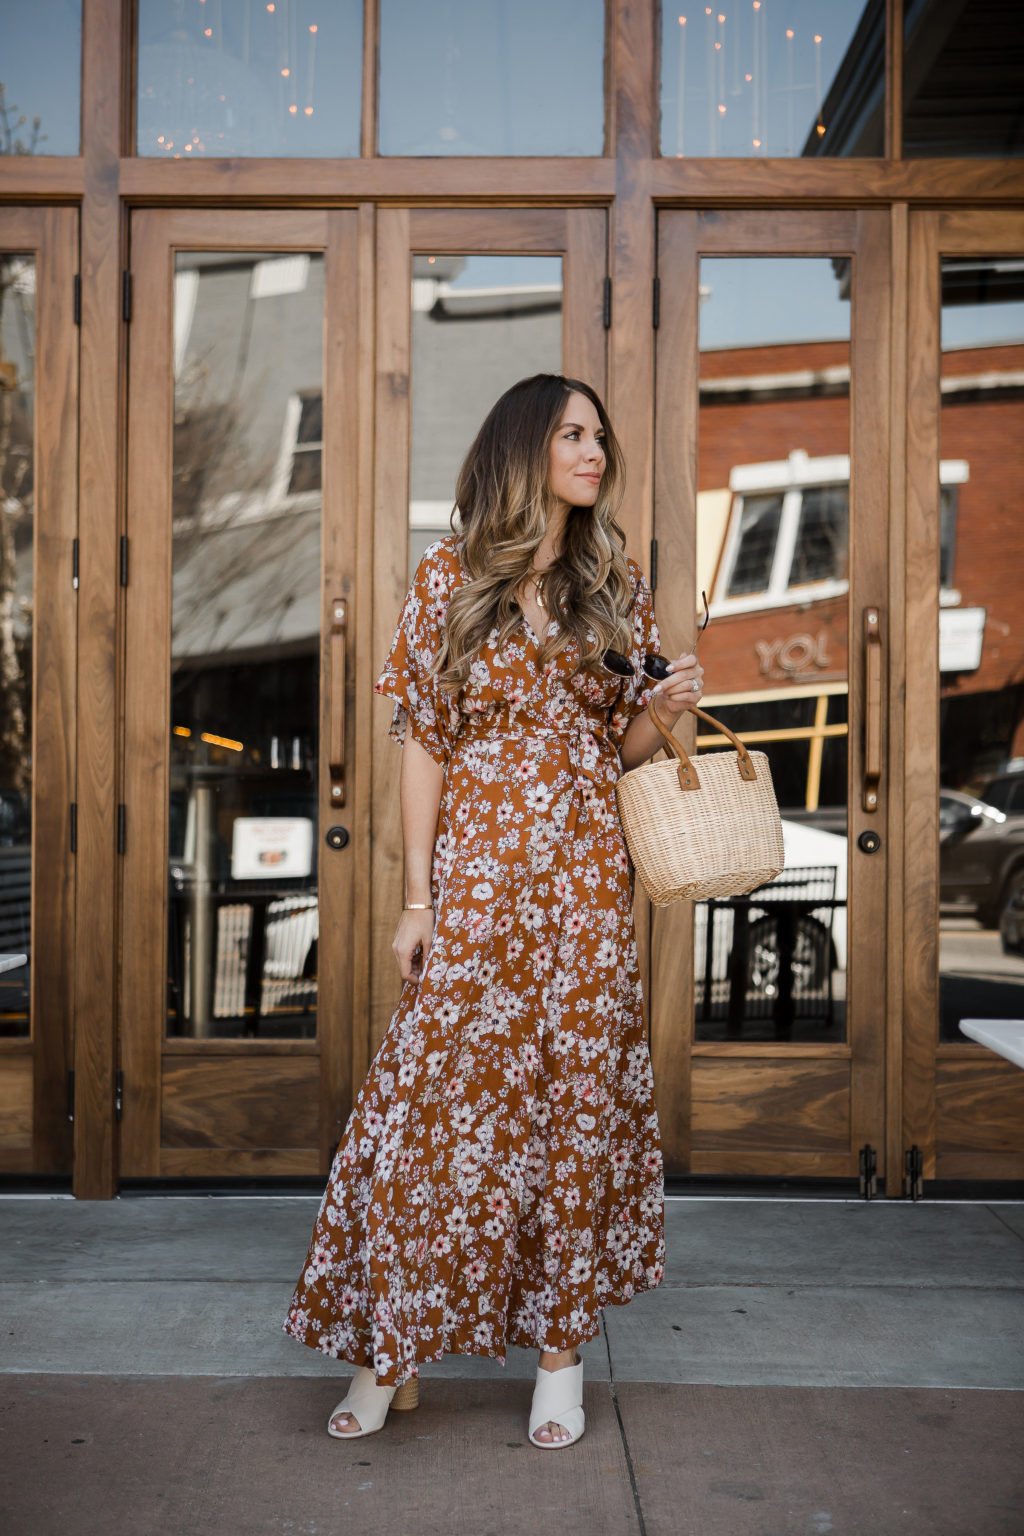 5 Reasons To Wear Maxi Dresses As Much As Possible